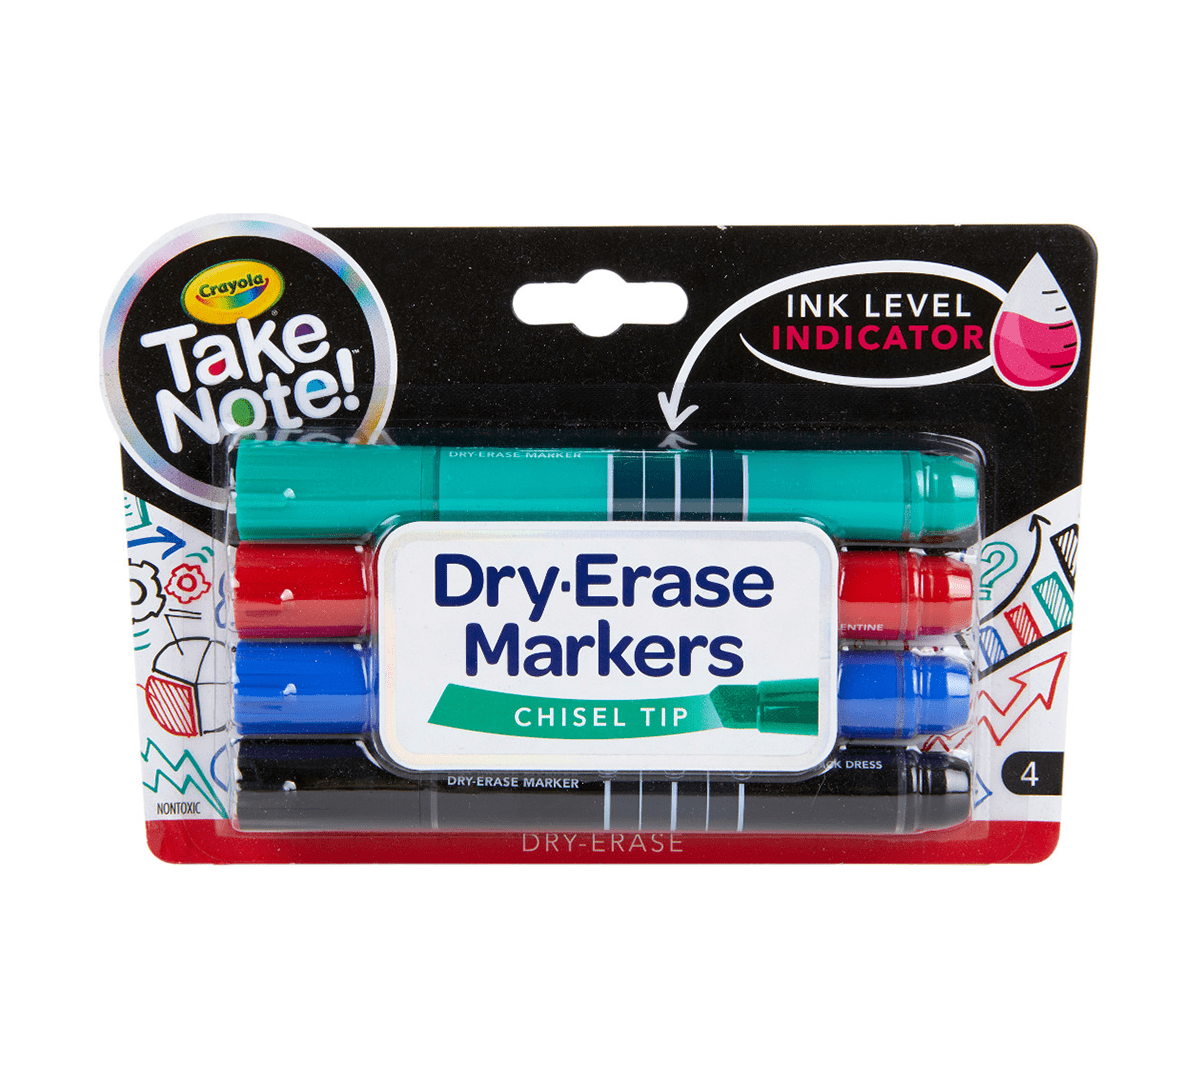 Crayola Take Note! Dry Erase Markers Fine Line (4 Count)